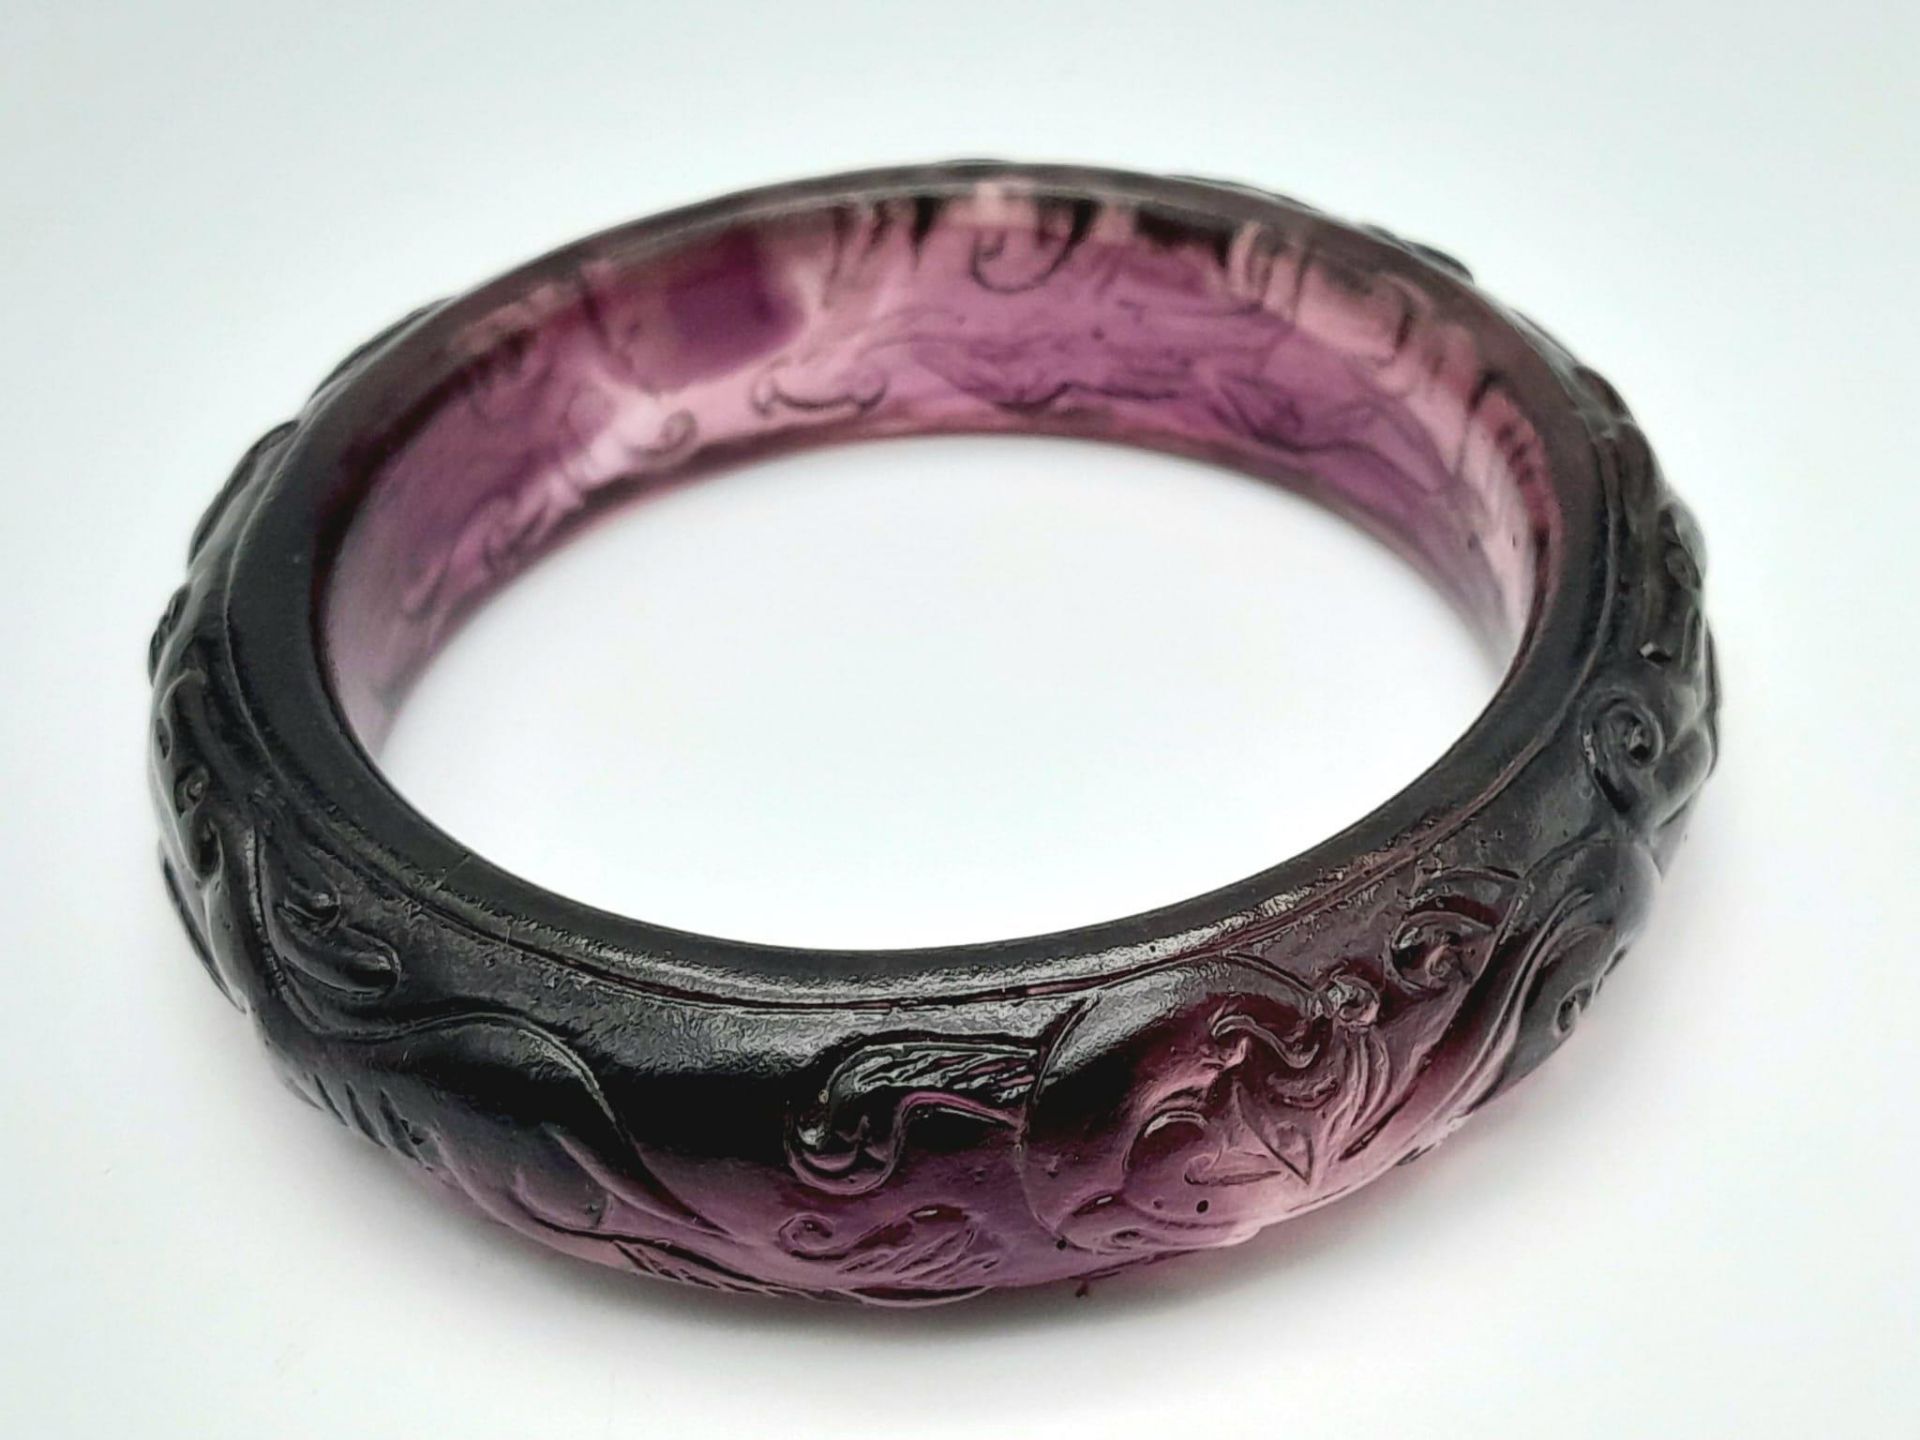 A rare, vintage, amethyst coloured PEKING GLASS bangle with carved hunting scene of dogs and